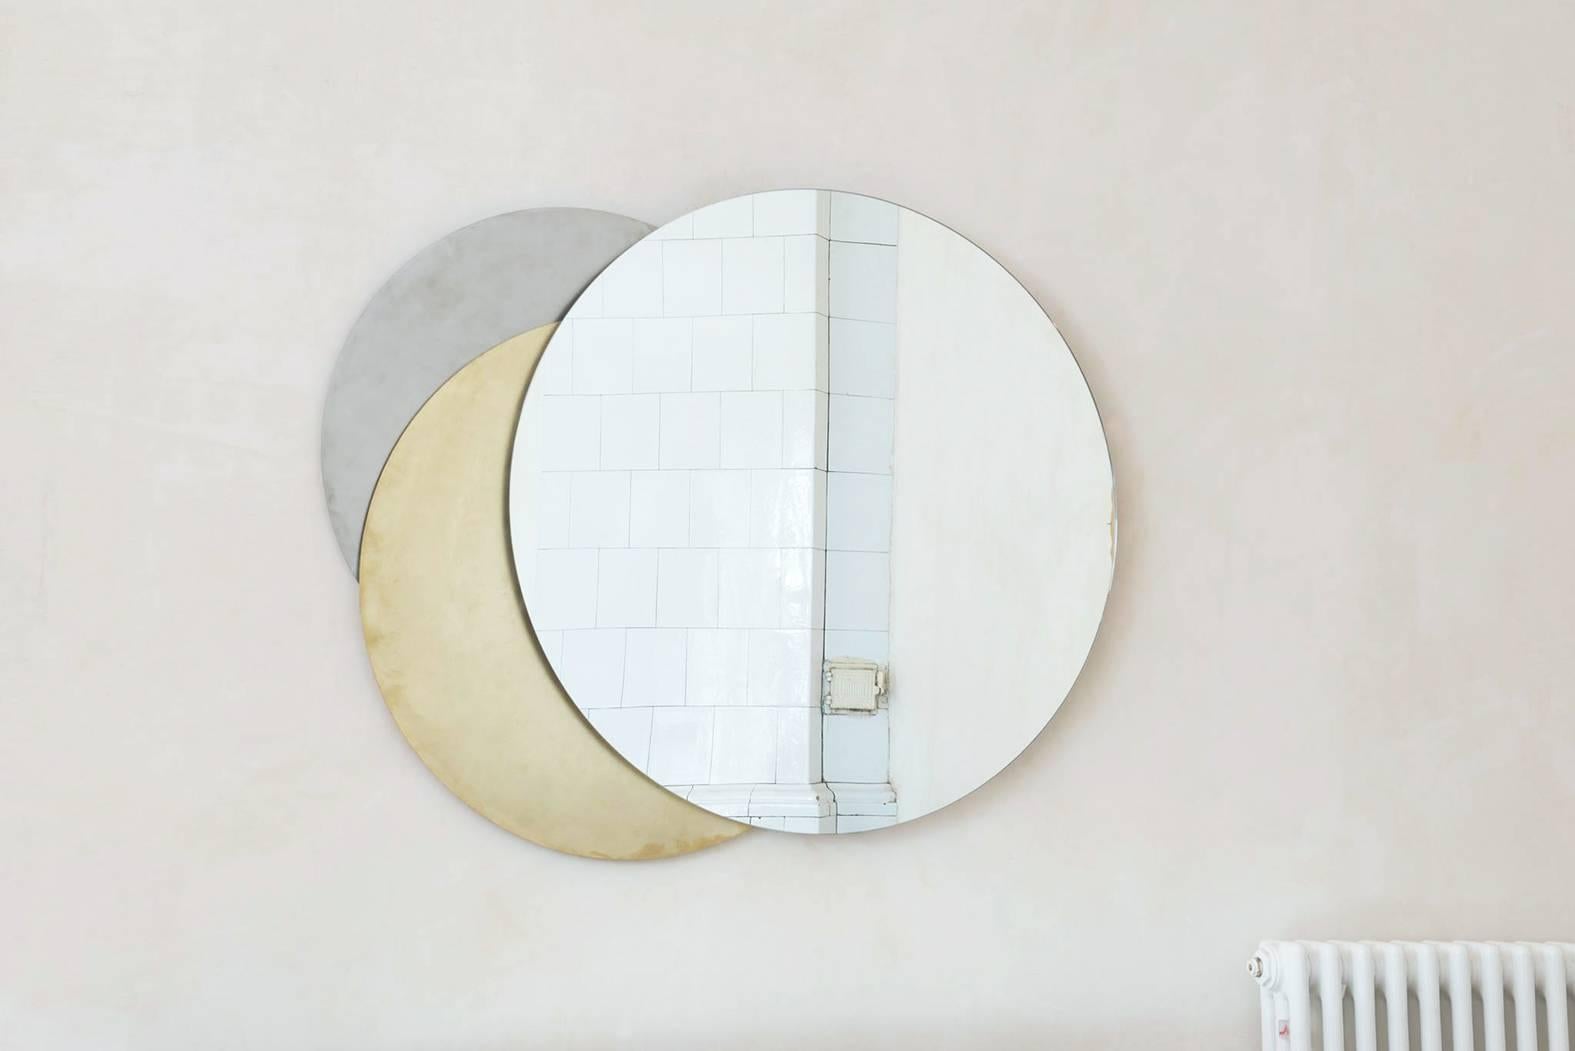 Dimensions: L 64/H 76cm.
Materials: Brass/Mirror/Stainless steel

Eclipse Mirror
“We need an inner light, which will stay in us, even when dark”. Being obsessed with the beauty and the mystery of the sun and the moon, Rooms decided to bring them